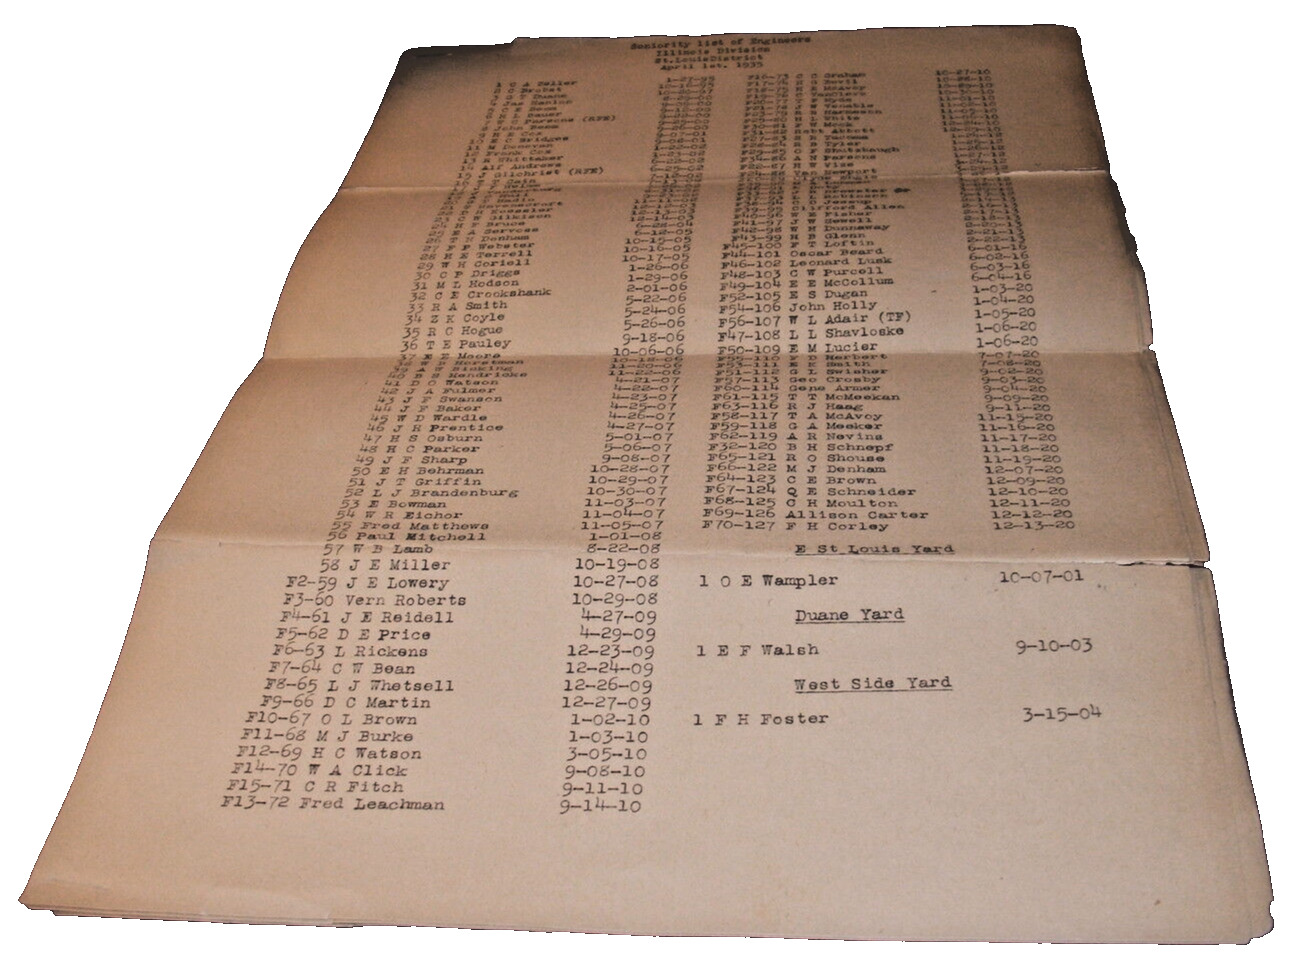 APRIL 1935 NYC NEW YORK CENTRAL ILLINOIS DIVISION ST. LOUIS DISTRICT ROSTER